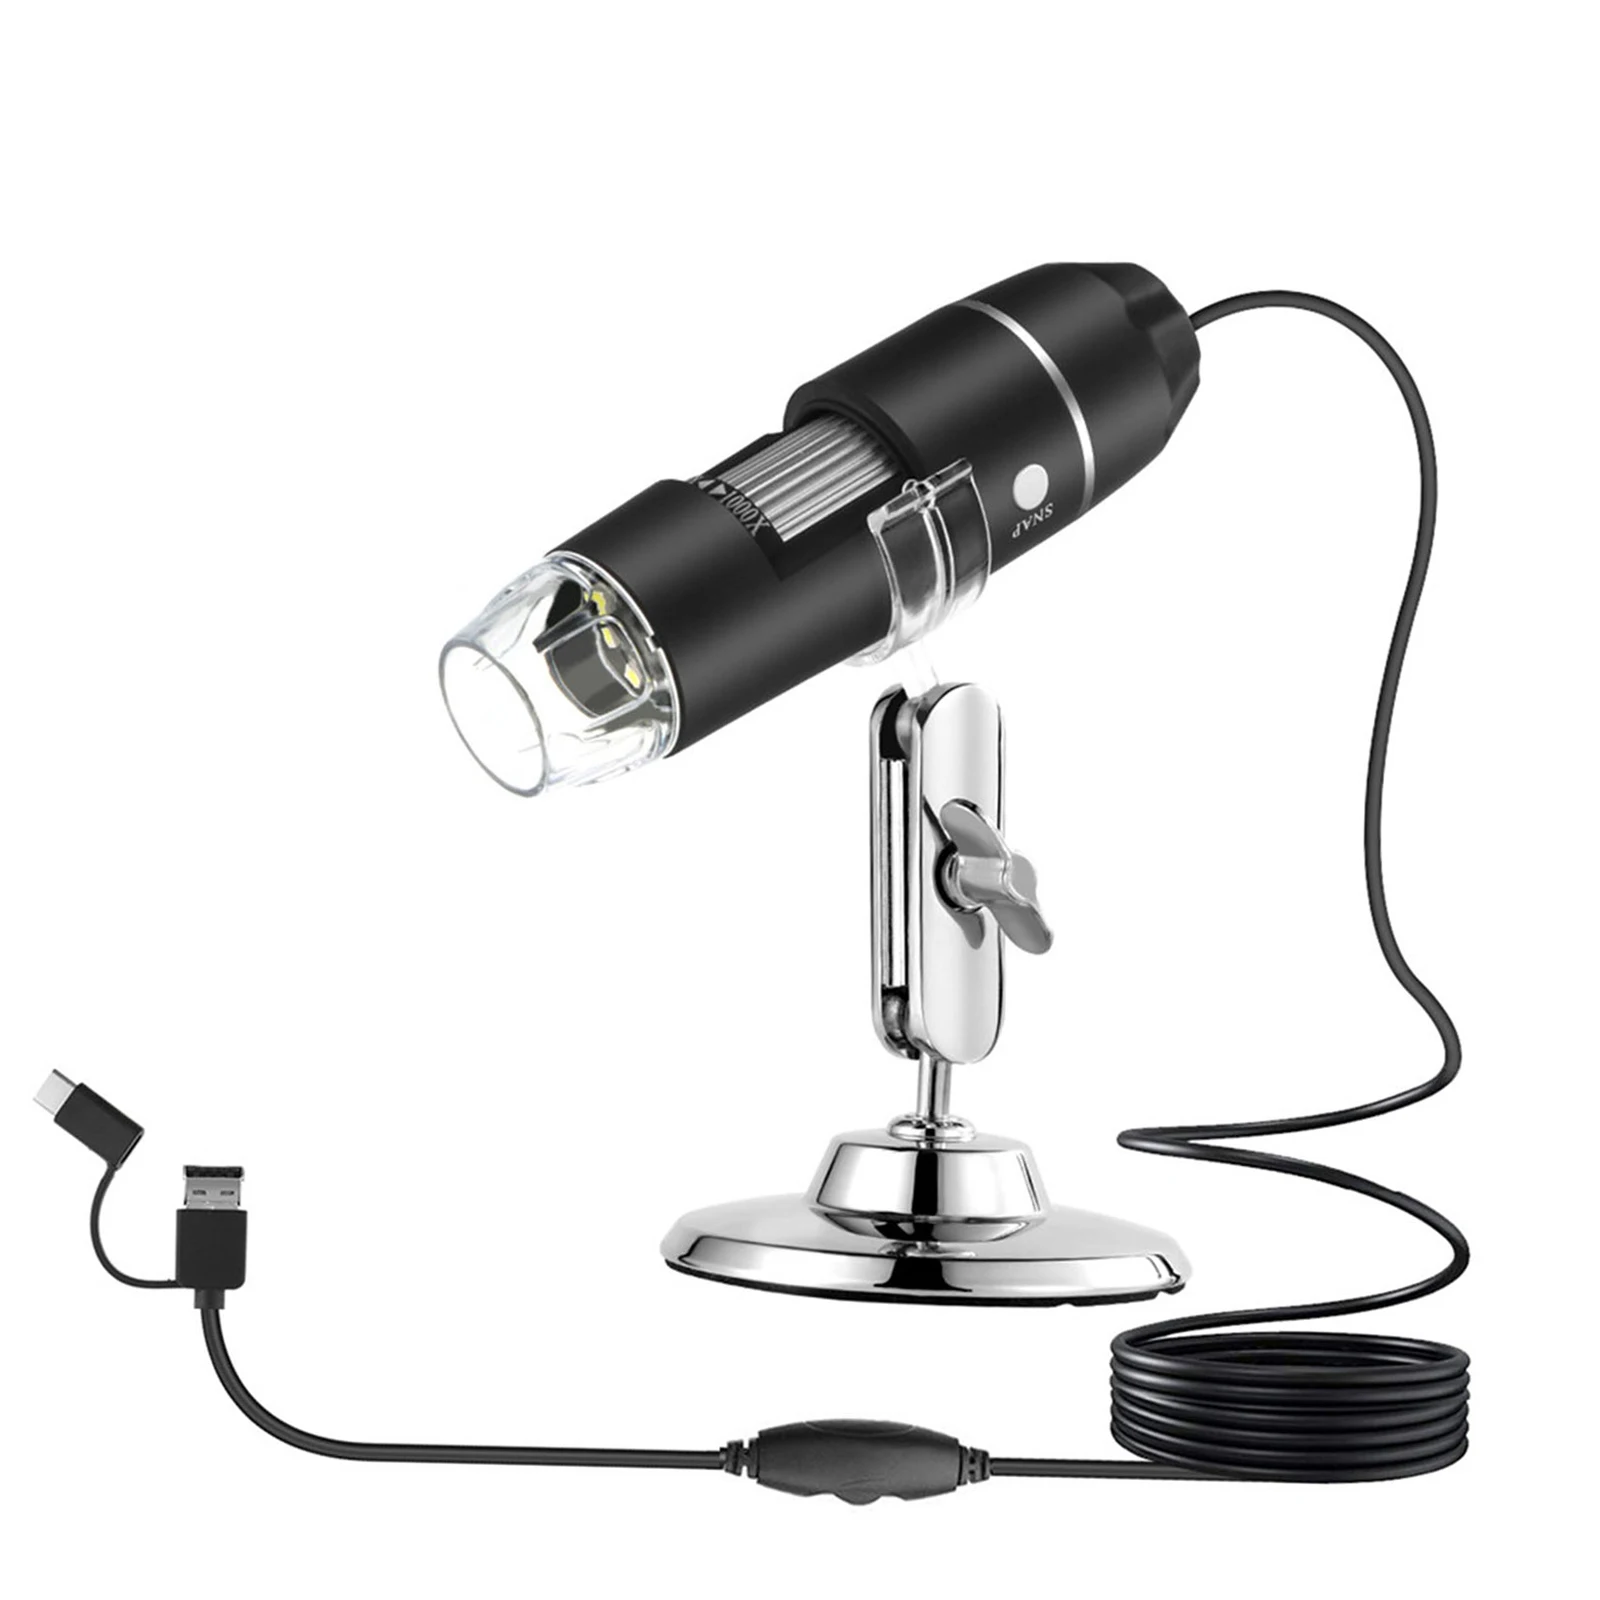 1000x 3 in 1 Magnification Microscope Handheld Monocular Endoscope with 8 LED Inspection Magnifier Mini Camera with Metal Stand